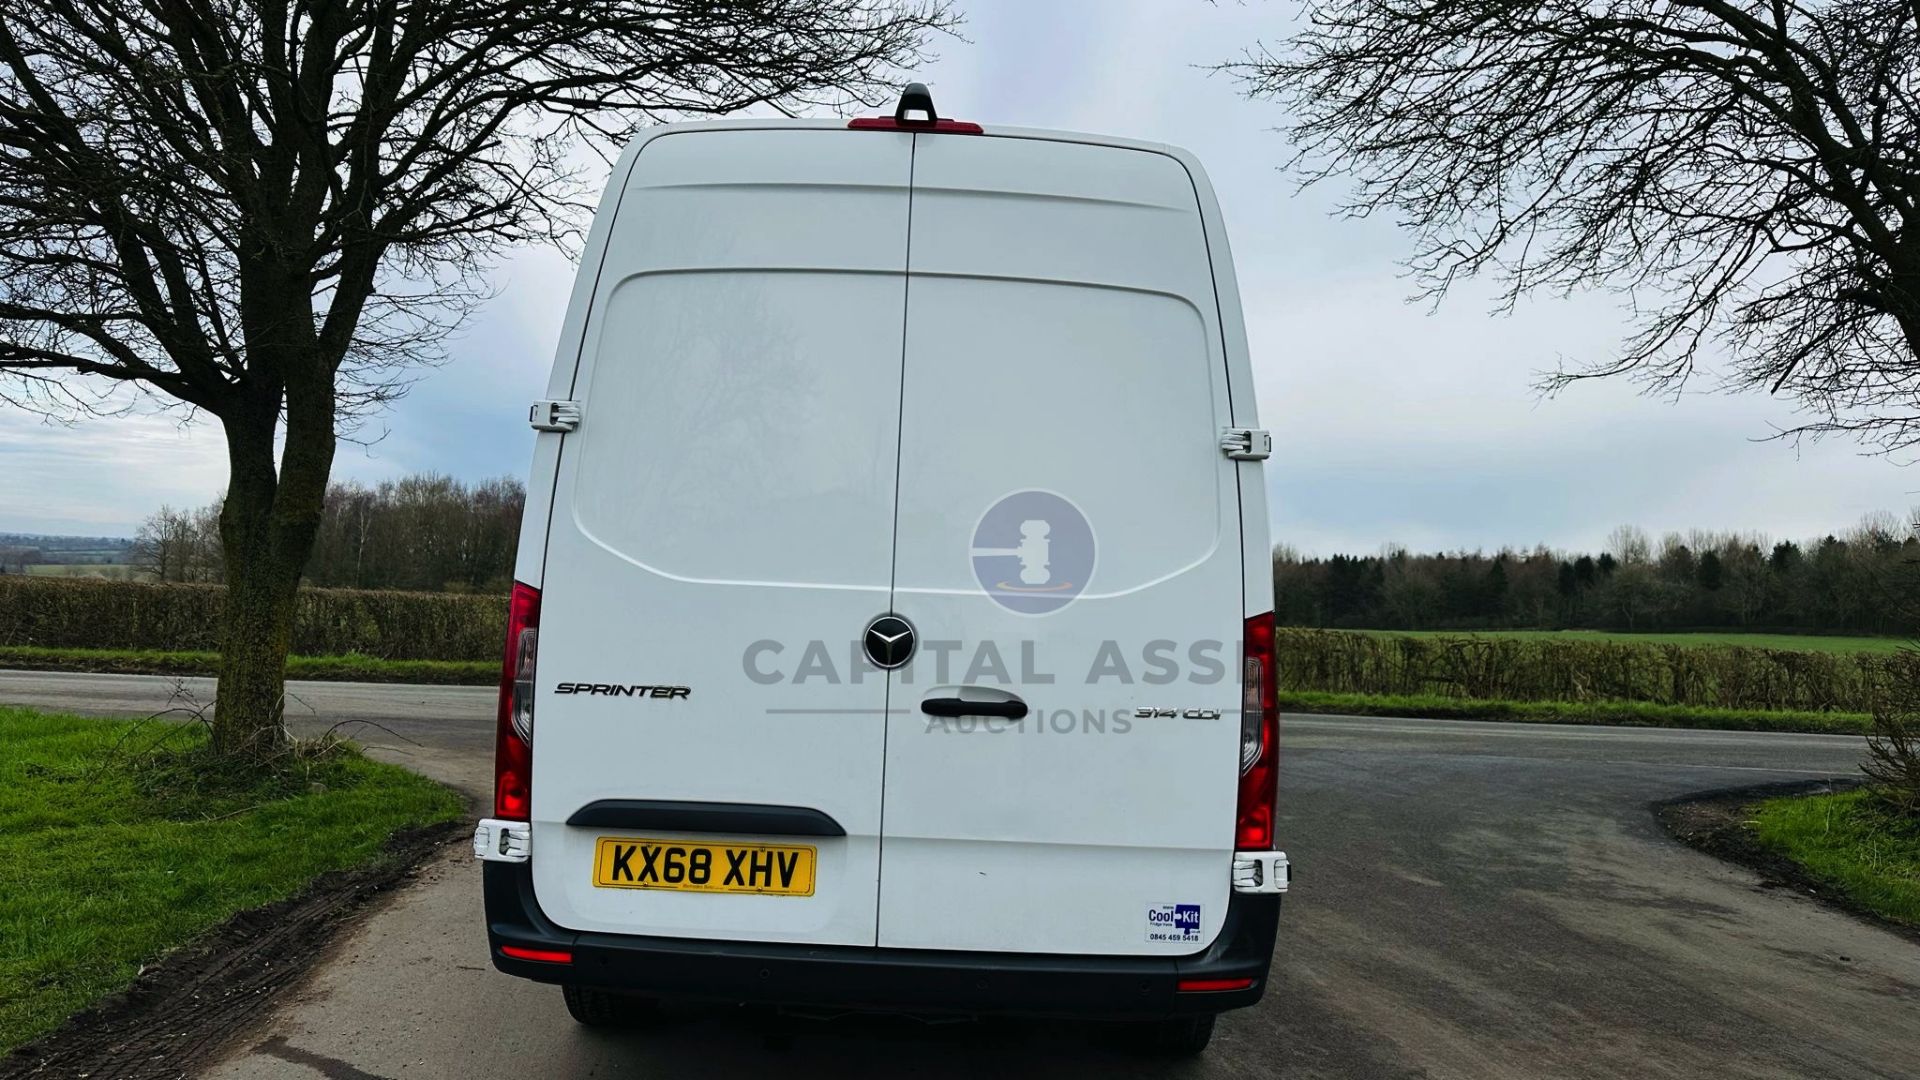 MERCEDES-BENZ SPRINTER 314 CDI *MWB - REFRIGERATED VAN* (2019 - FACELIFT MODEL) *OVERNIGHT STANDBY* - Image 13 of 41